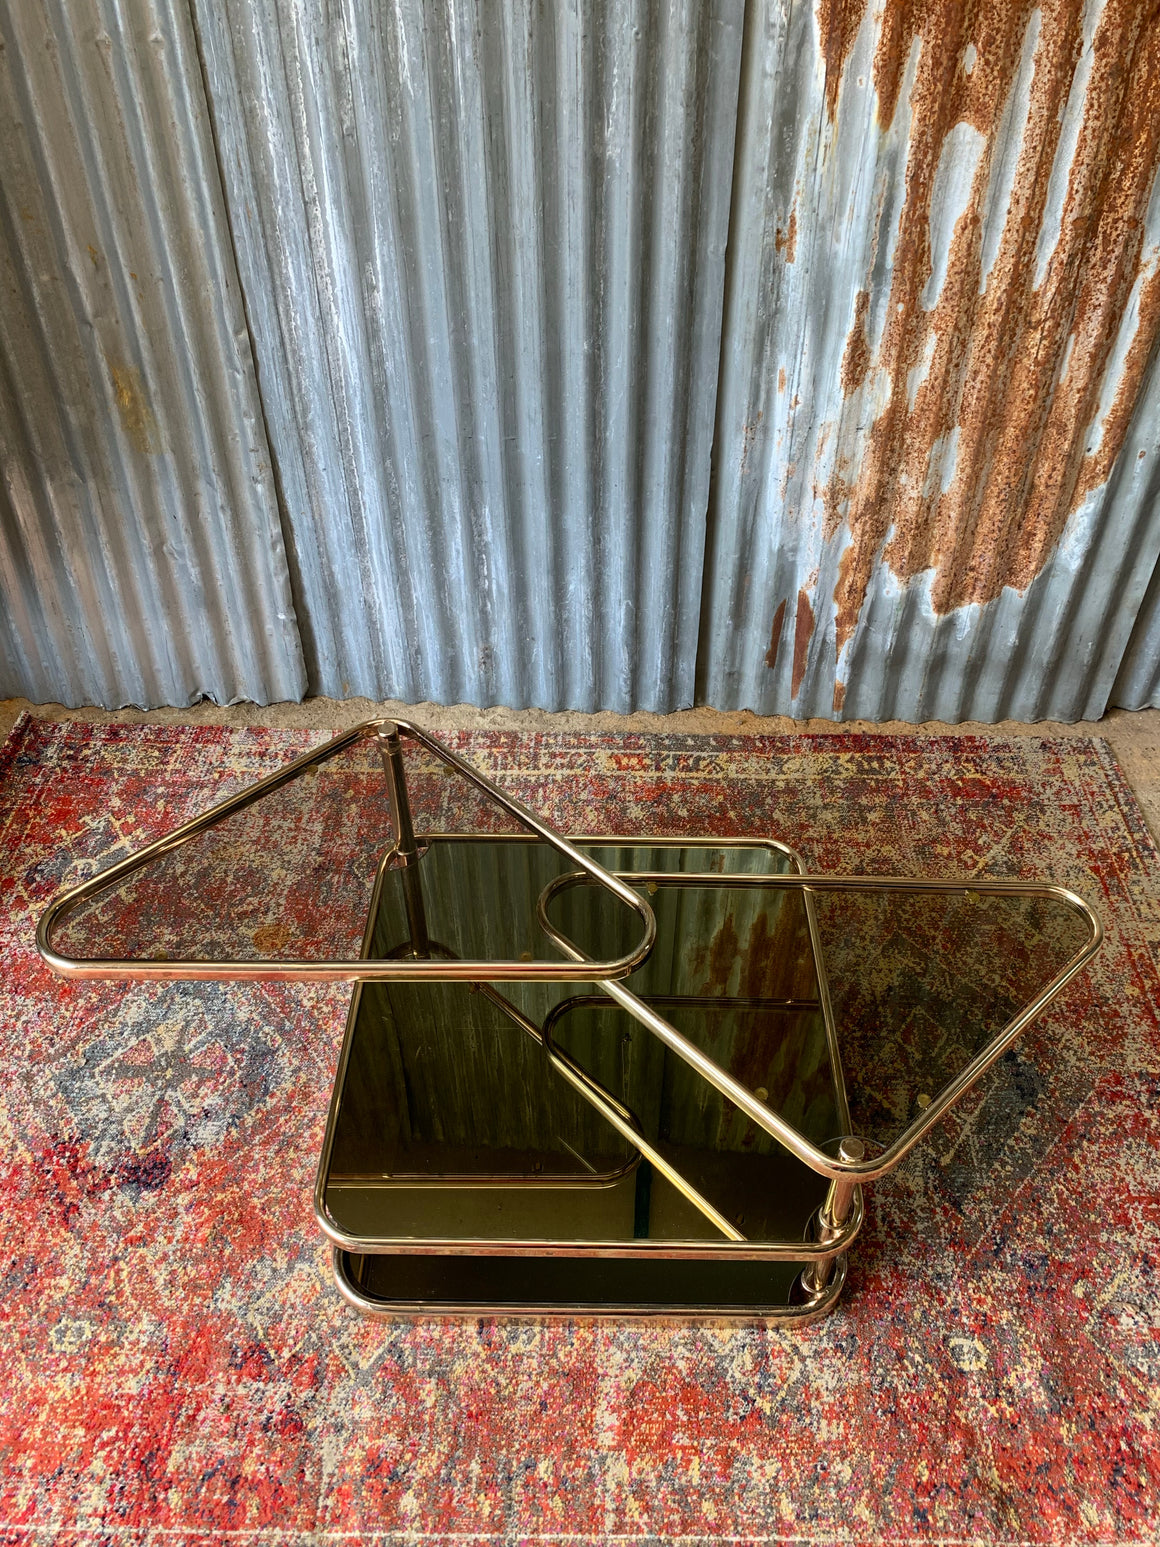 A Milo Baughman style swivel brass and mirrored glass table